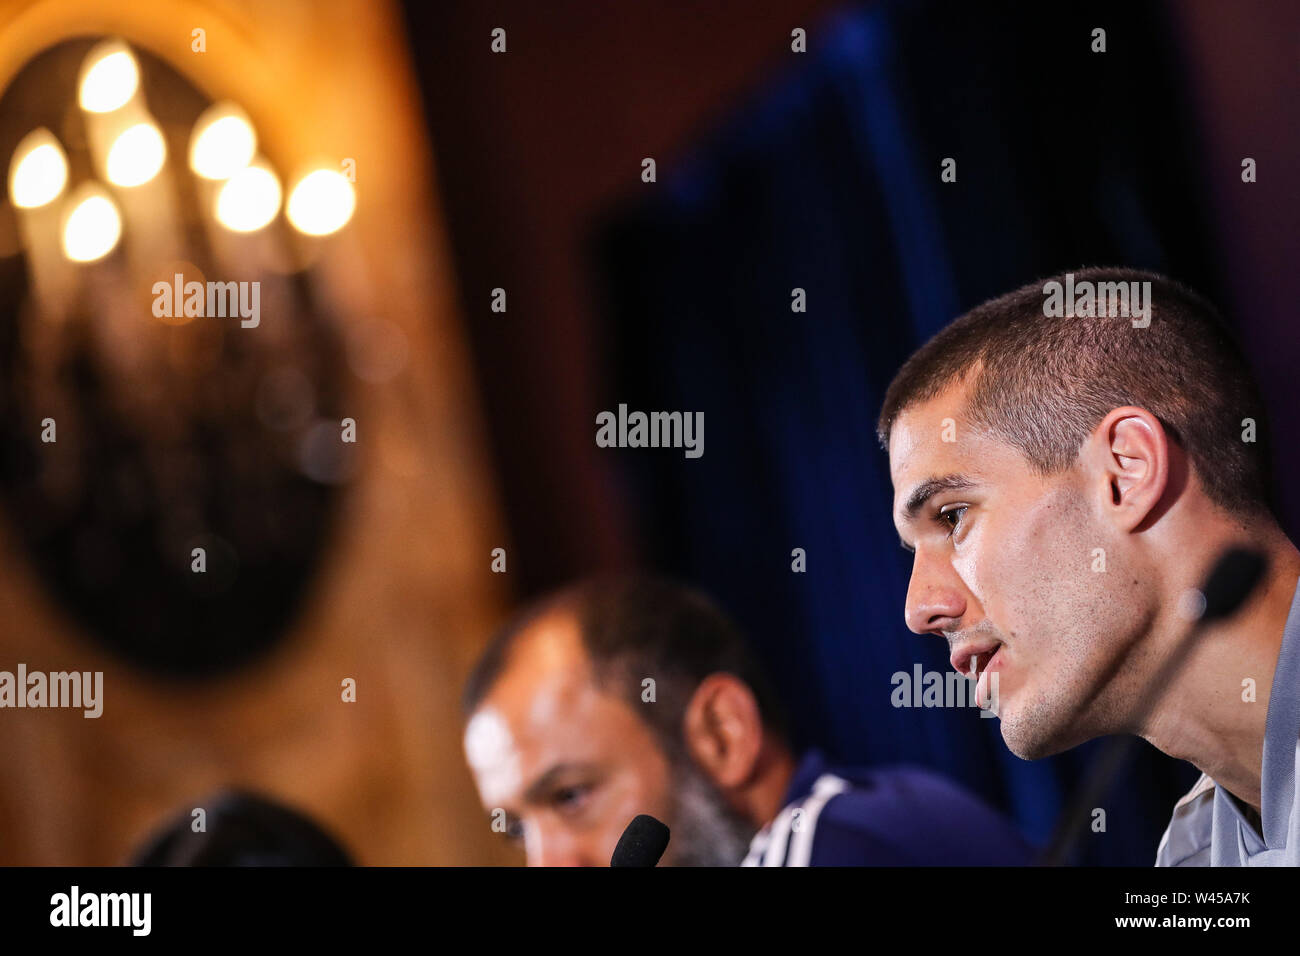 Conor Coady of Wolverhampton Wanderers F.C. of English League champions attends a press conference for the final match during the Premier League Asia Trophy 2019 against Manchester City F.C. in Shanghai, China, 19 July 2019. Stock Photo